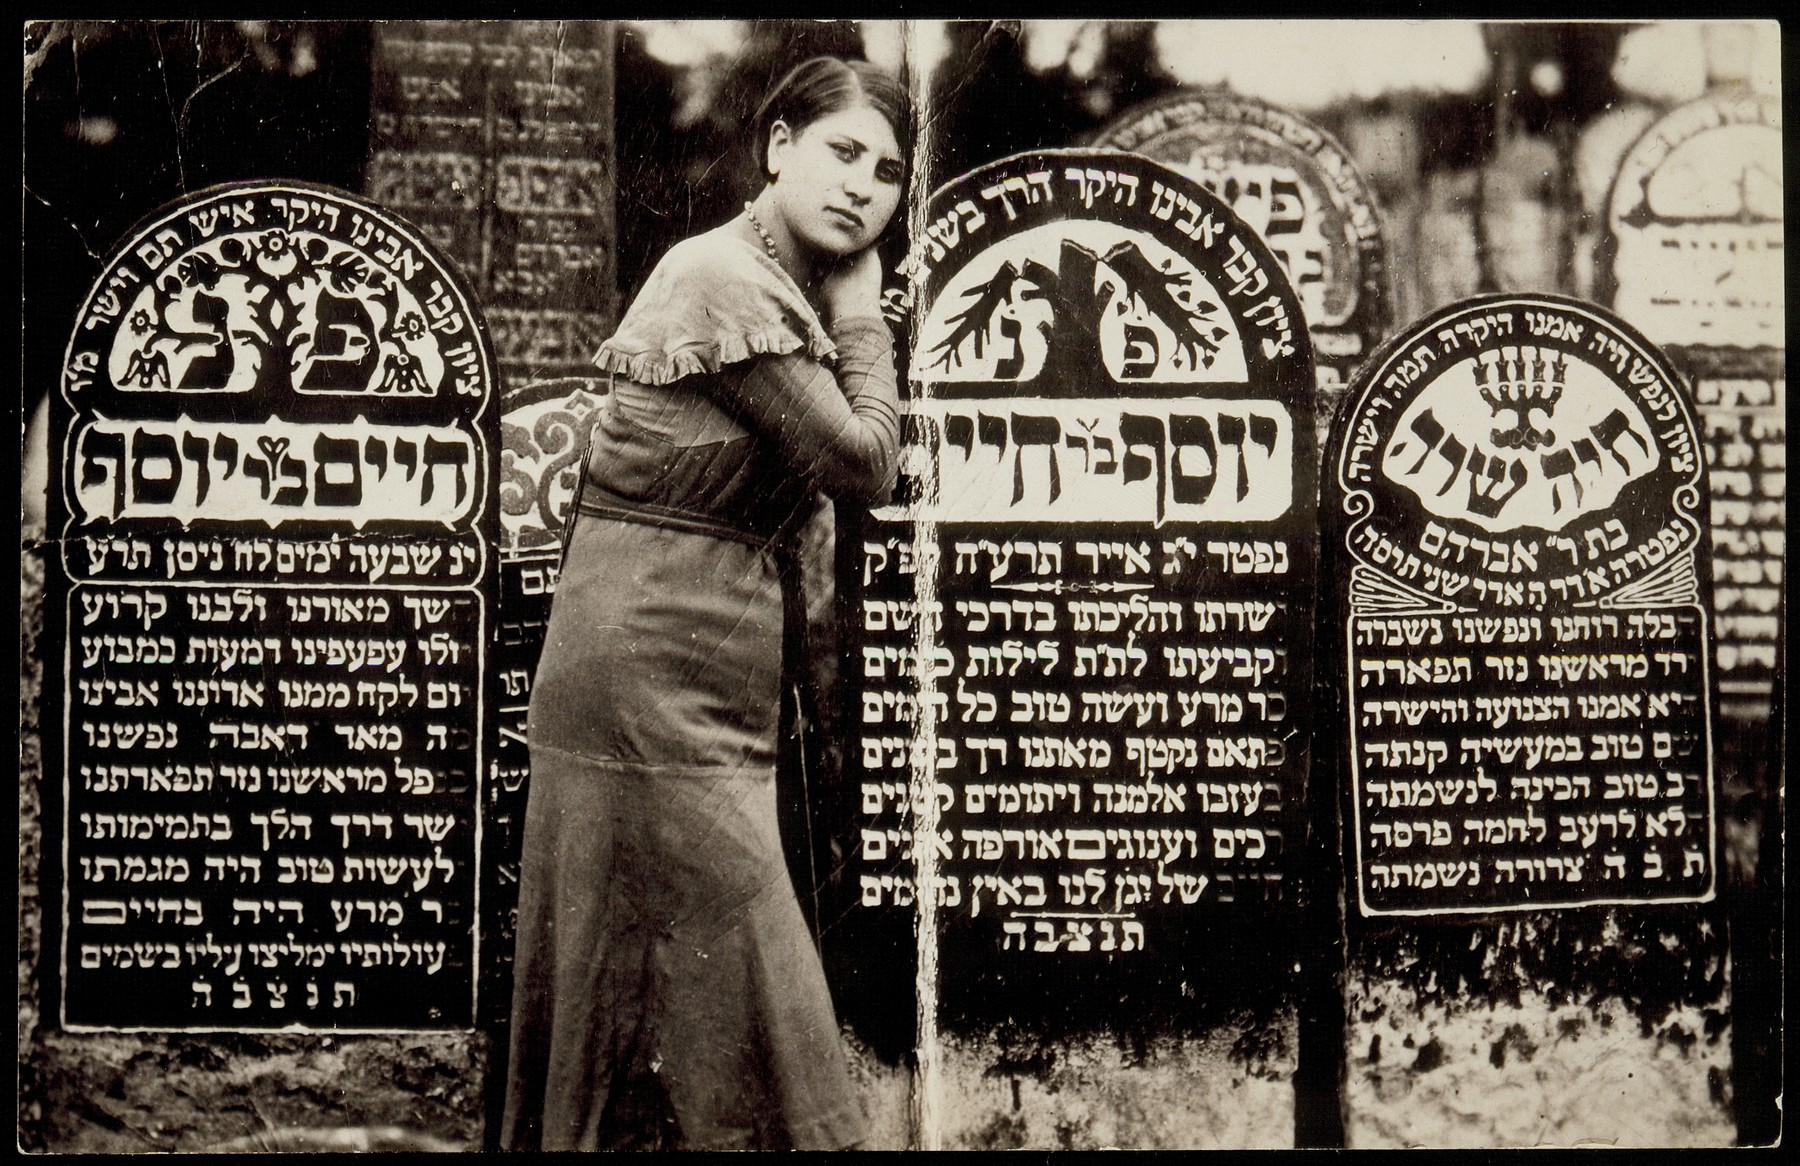 Rivka Shuster stands at the grave of her father Joseph who died in 1915. 

On her right is the grave of her grandfather Hayyim Shuster, who died in 1910.  Rivka survived the Holocaust in hiding with her son Joseph who was born on January 31, 1943 in the forest